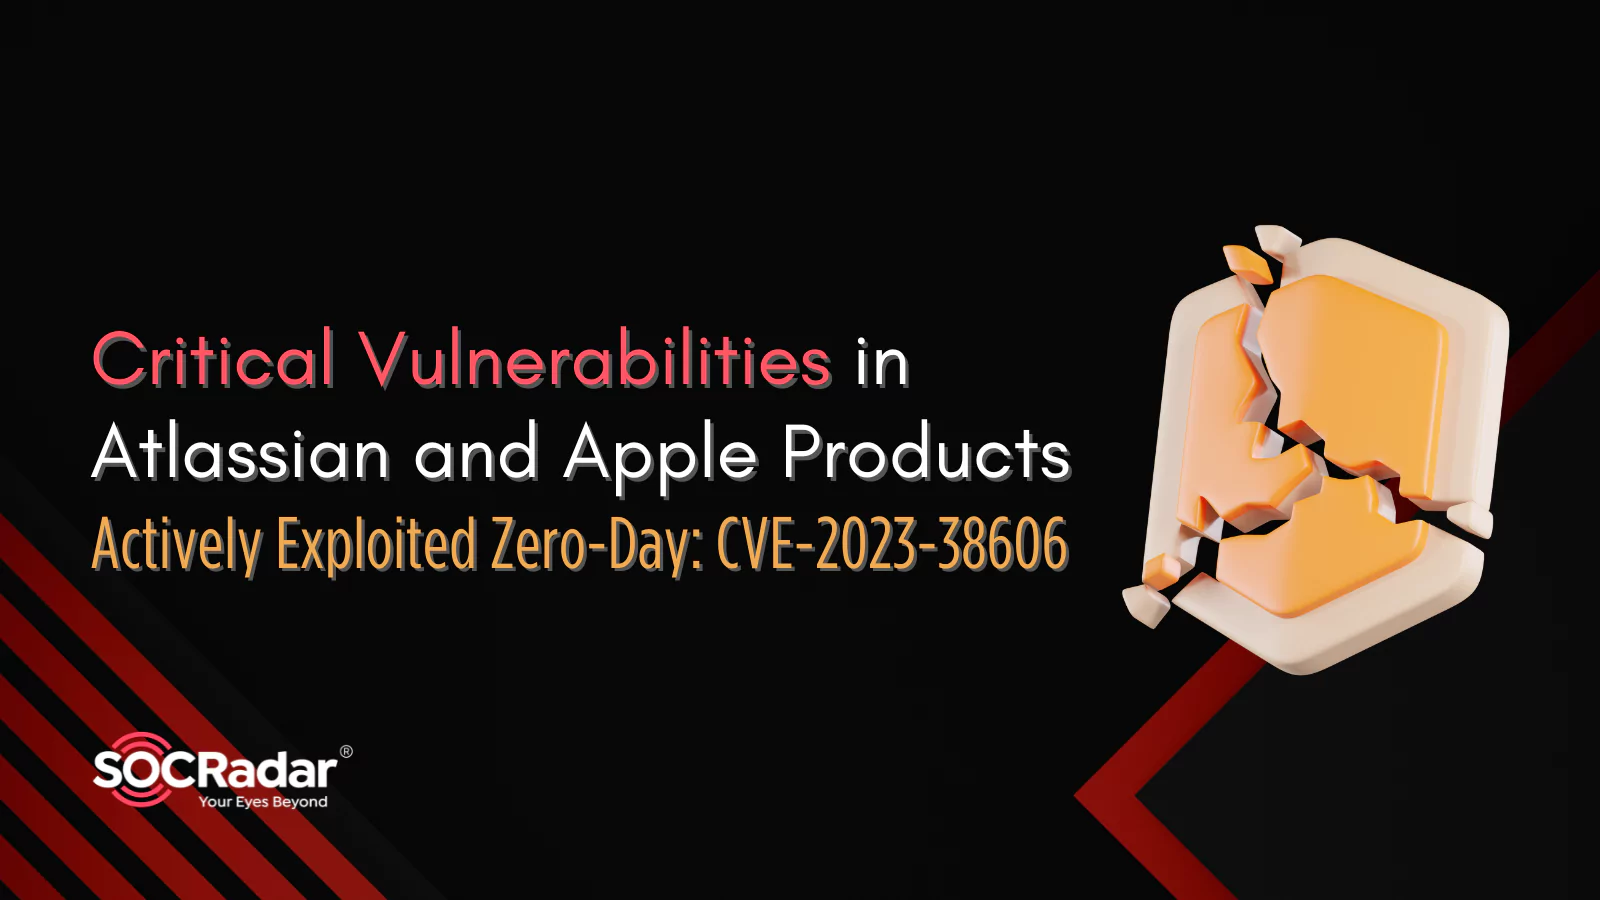 SOCRadar® Cyber Intelligence Inc. | Critical Vulnerabilities in Atlassian and Apple Products: Apple Zero-Day Actively Exploited (CVE-2023-38606)